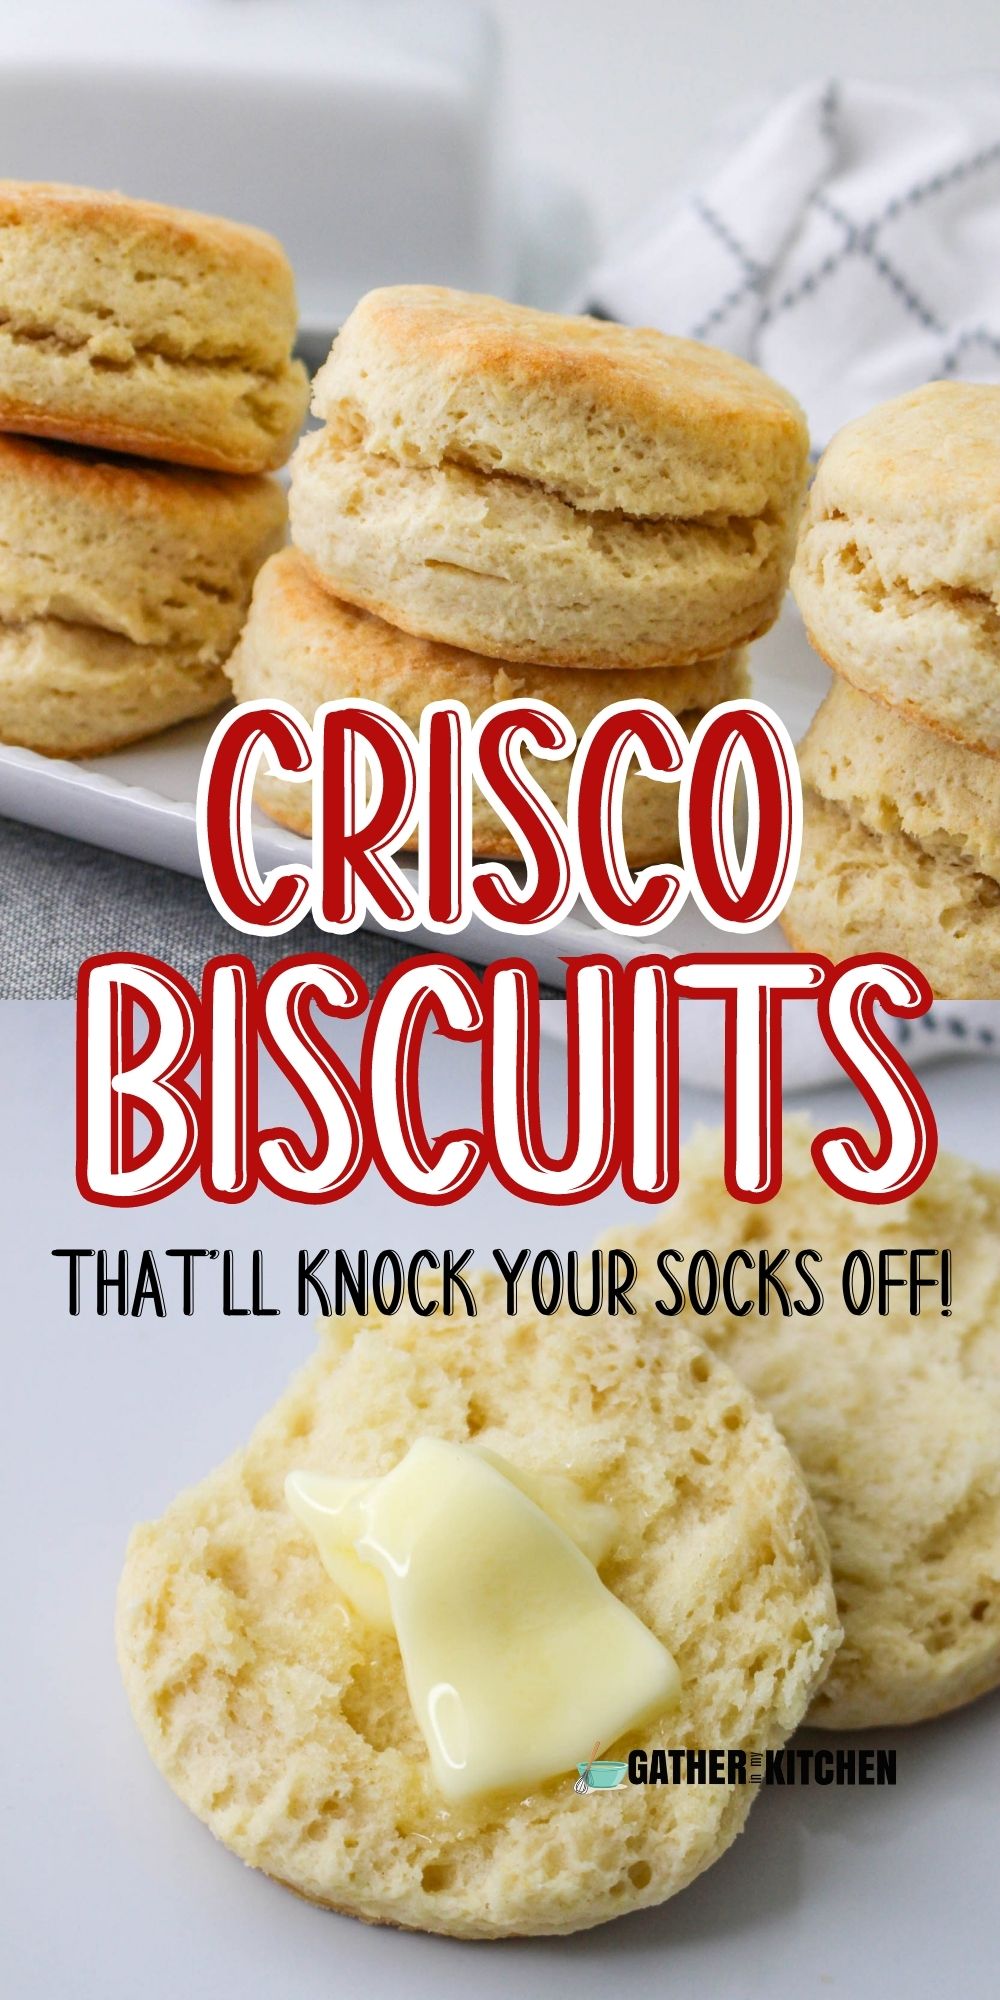 Pin image: top shows stacked crisco biscuit, middle says "Crisco biscuits that will knock your socks off!" and bottom is a biscuit sliced in half with butter on it.